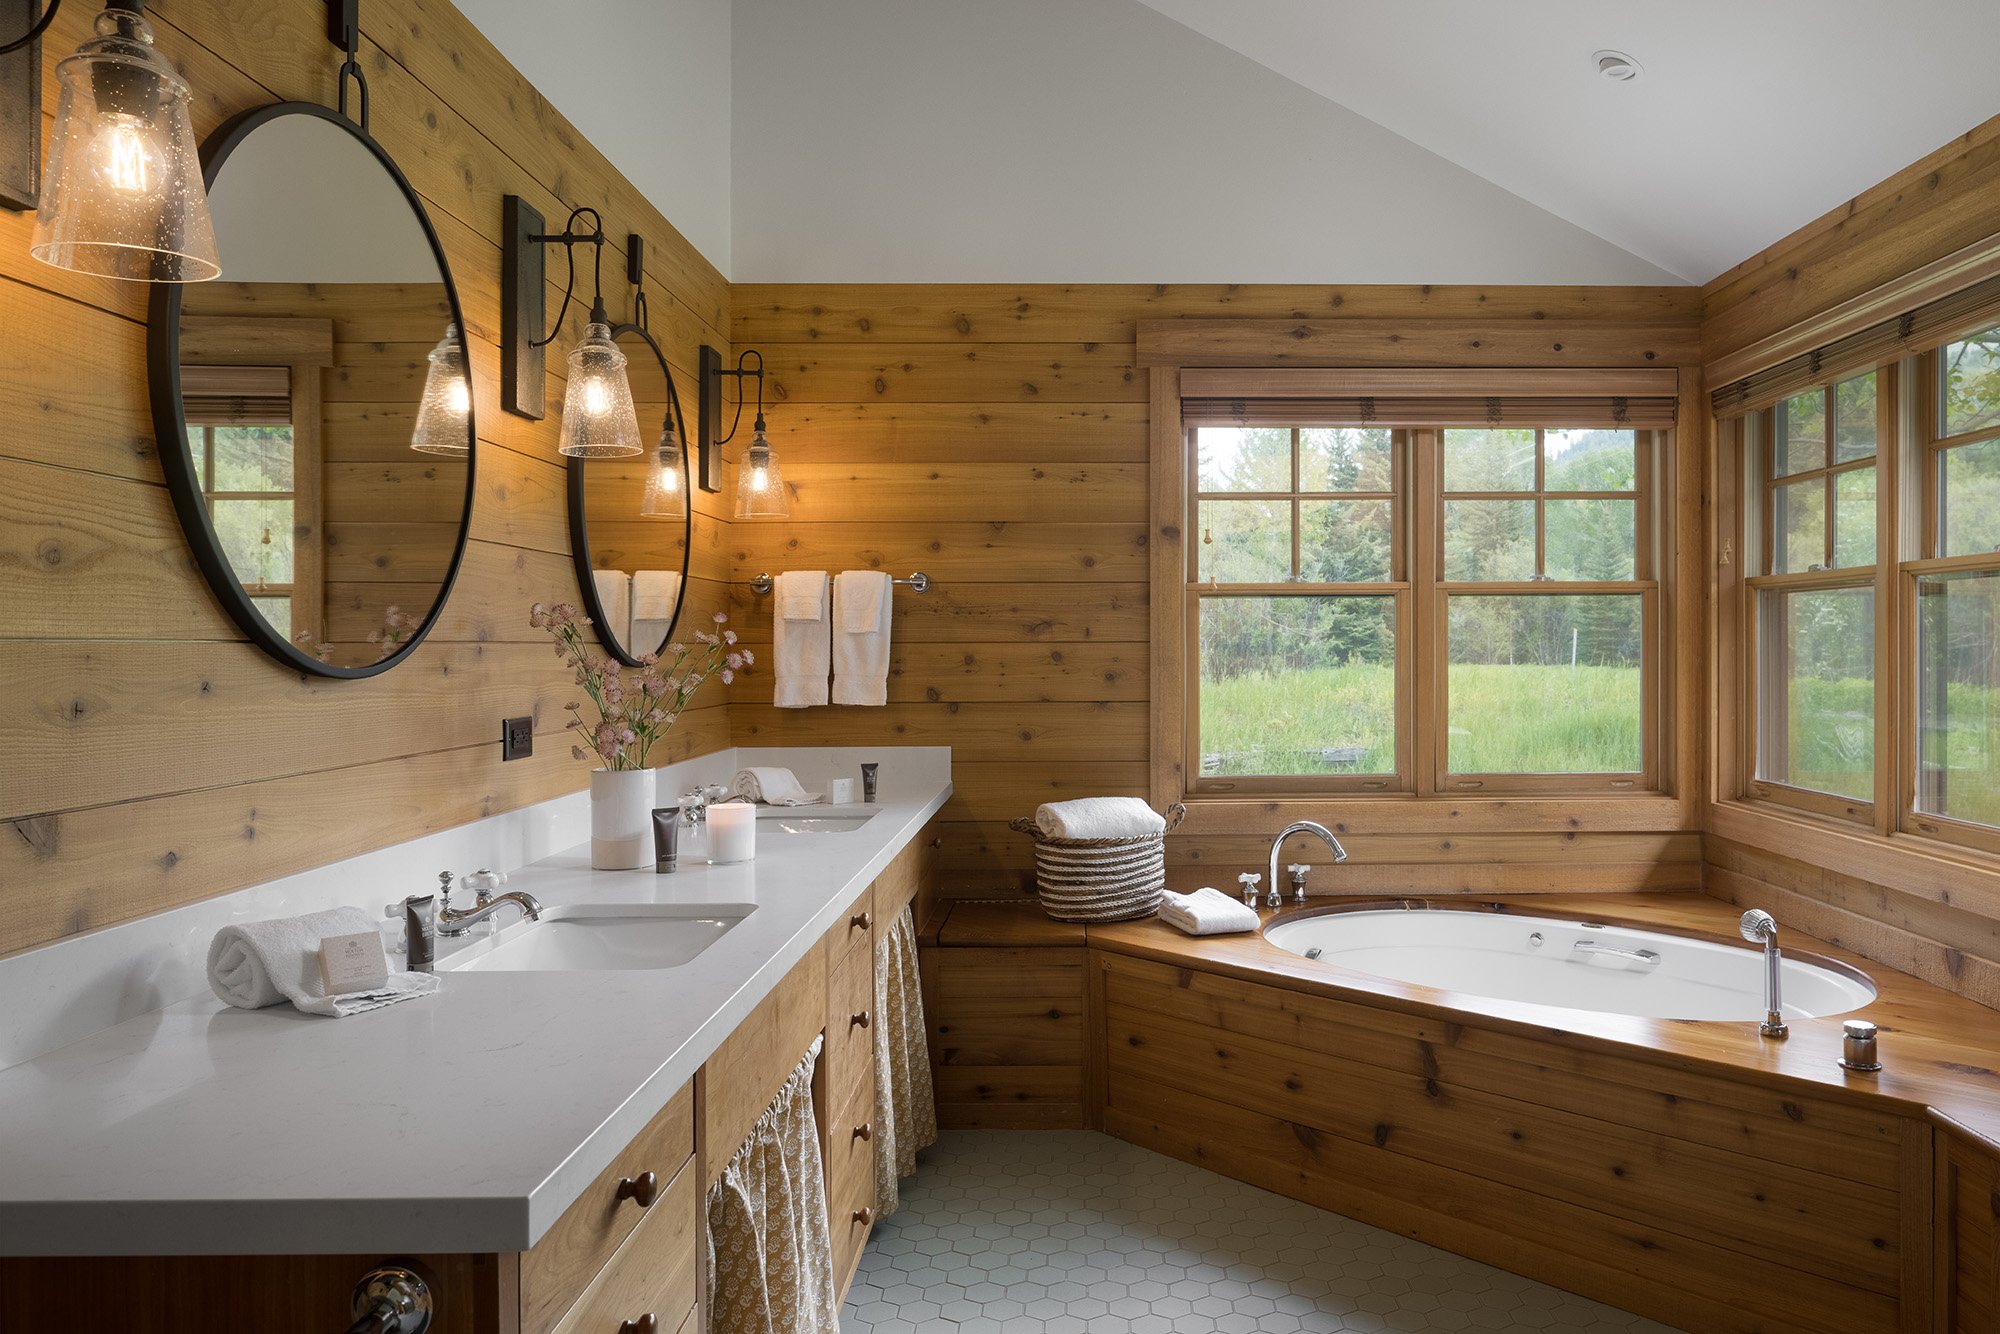 Bathroom in a cabin with a spa tub